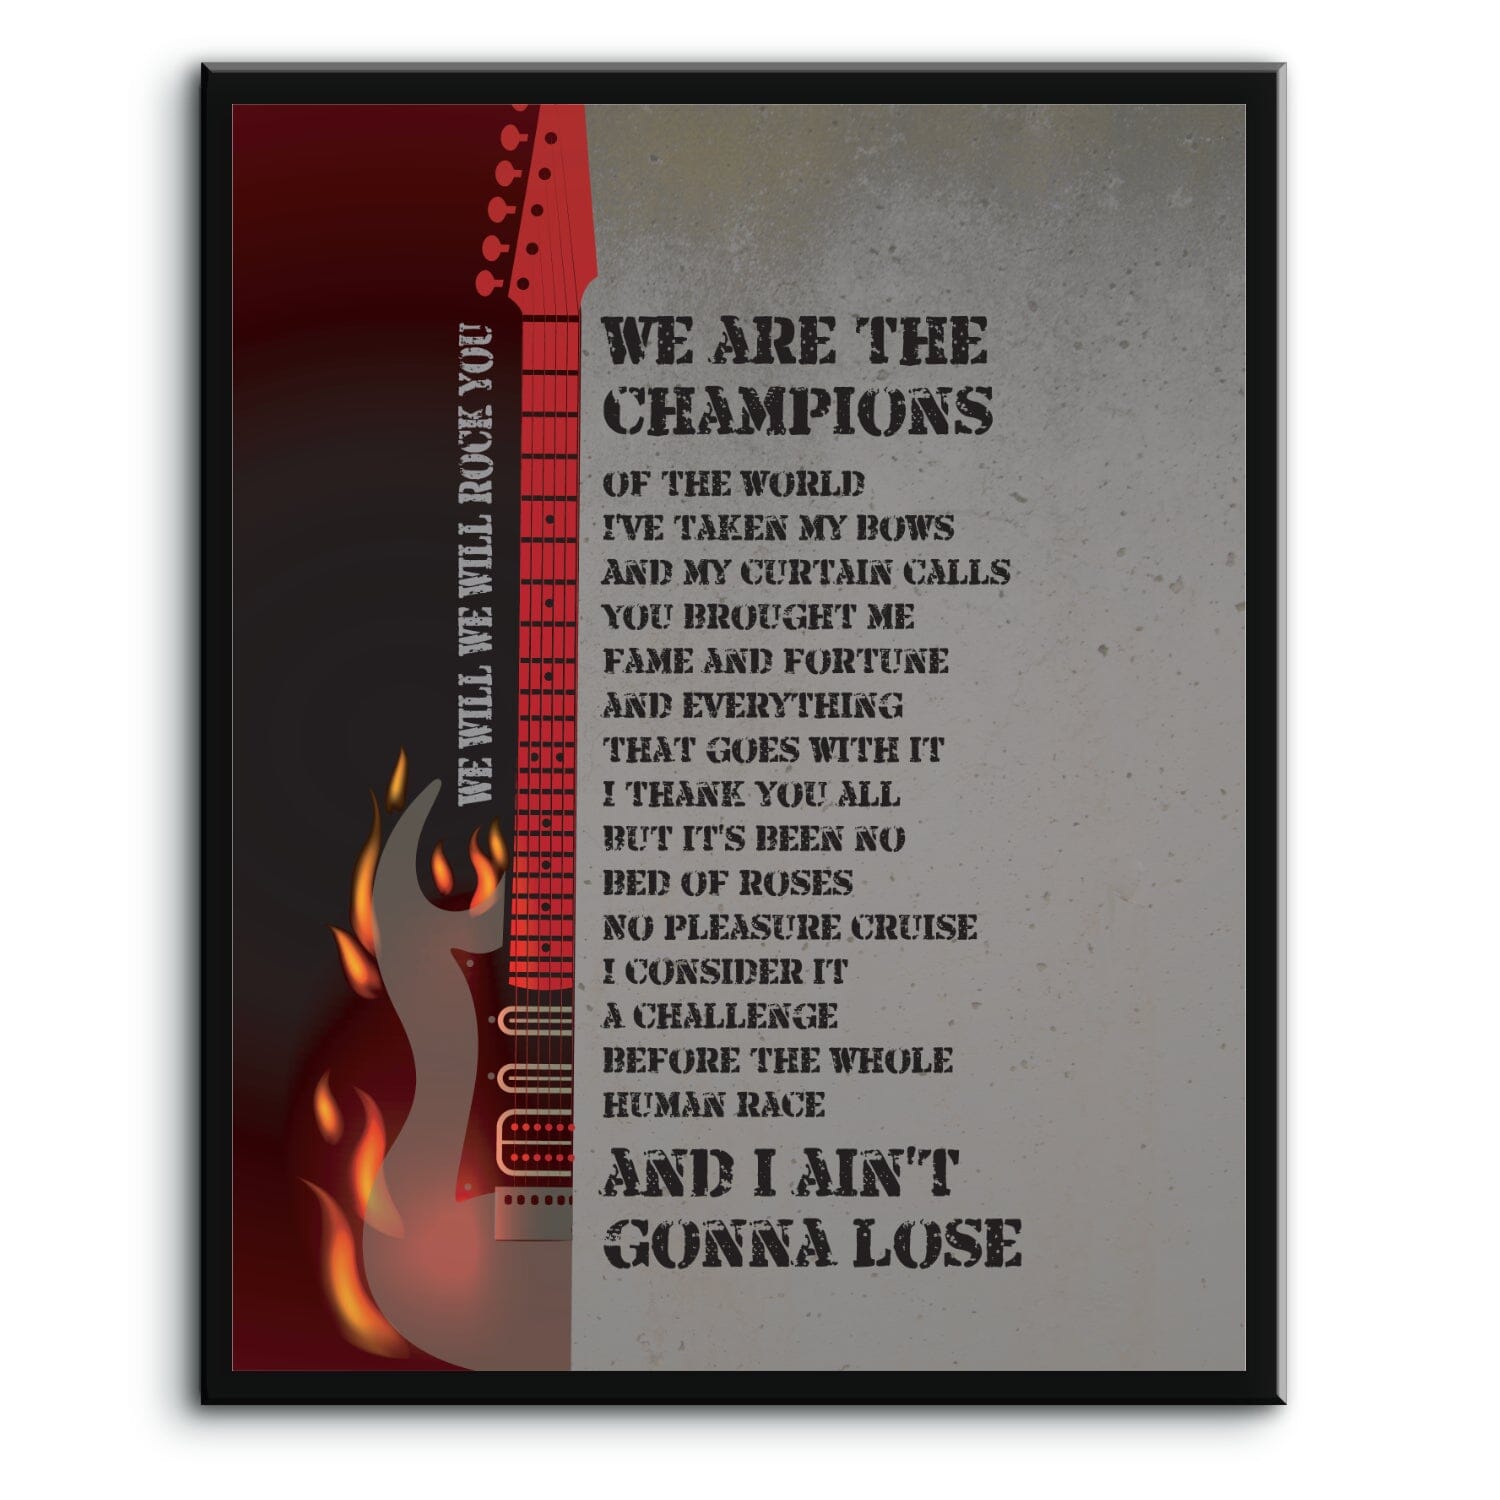 We Will Rock You, We are the Champions by Queen - Lyric Art Song Lyrics Art Song Lyrics Art 8x10 Plaque Mount 